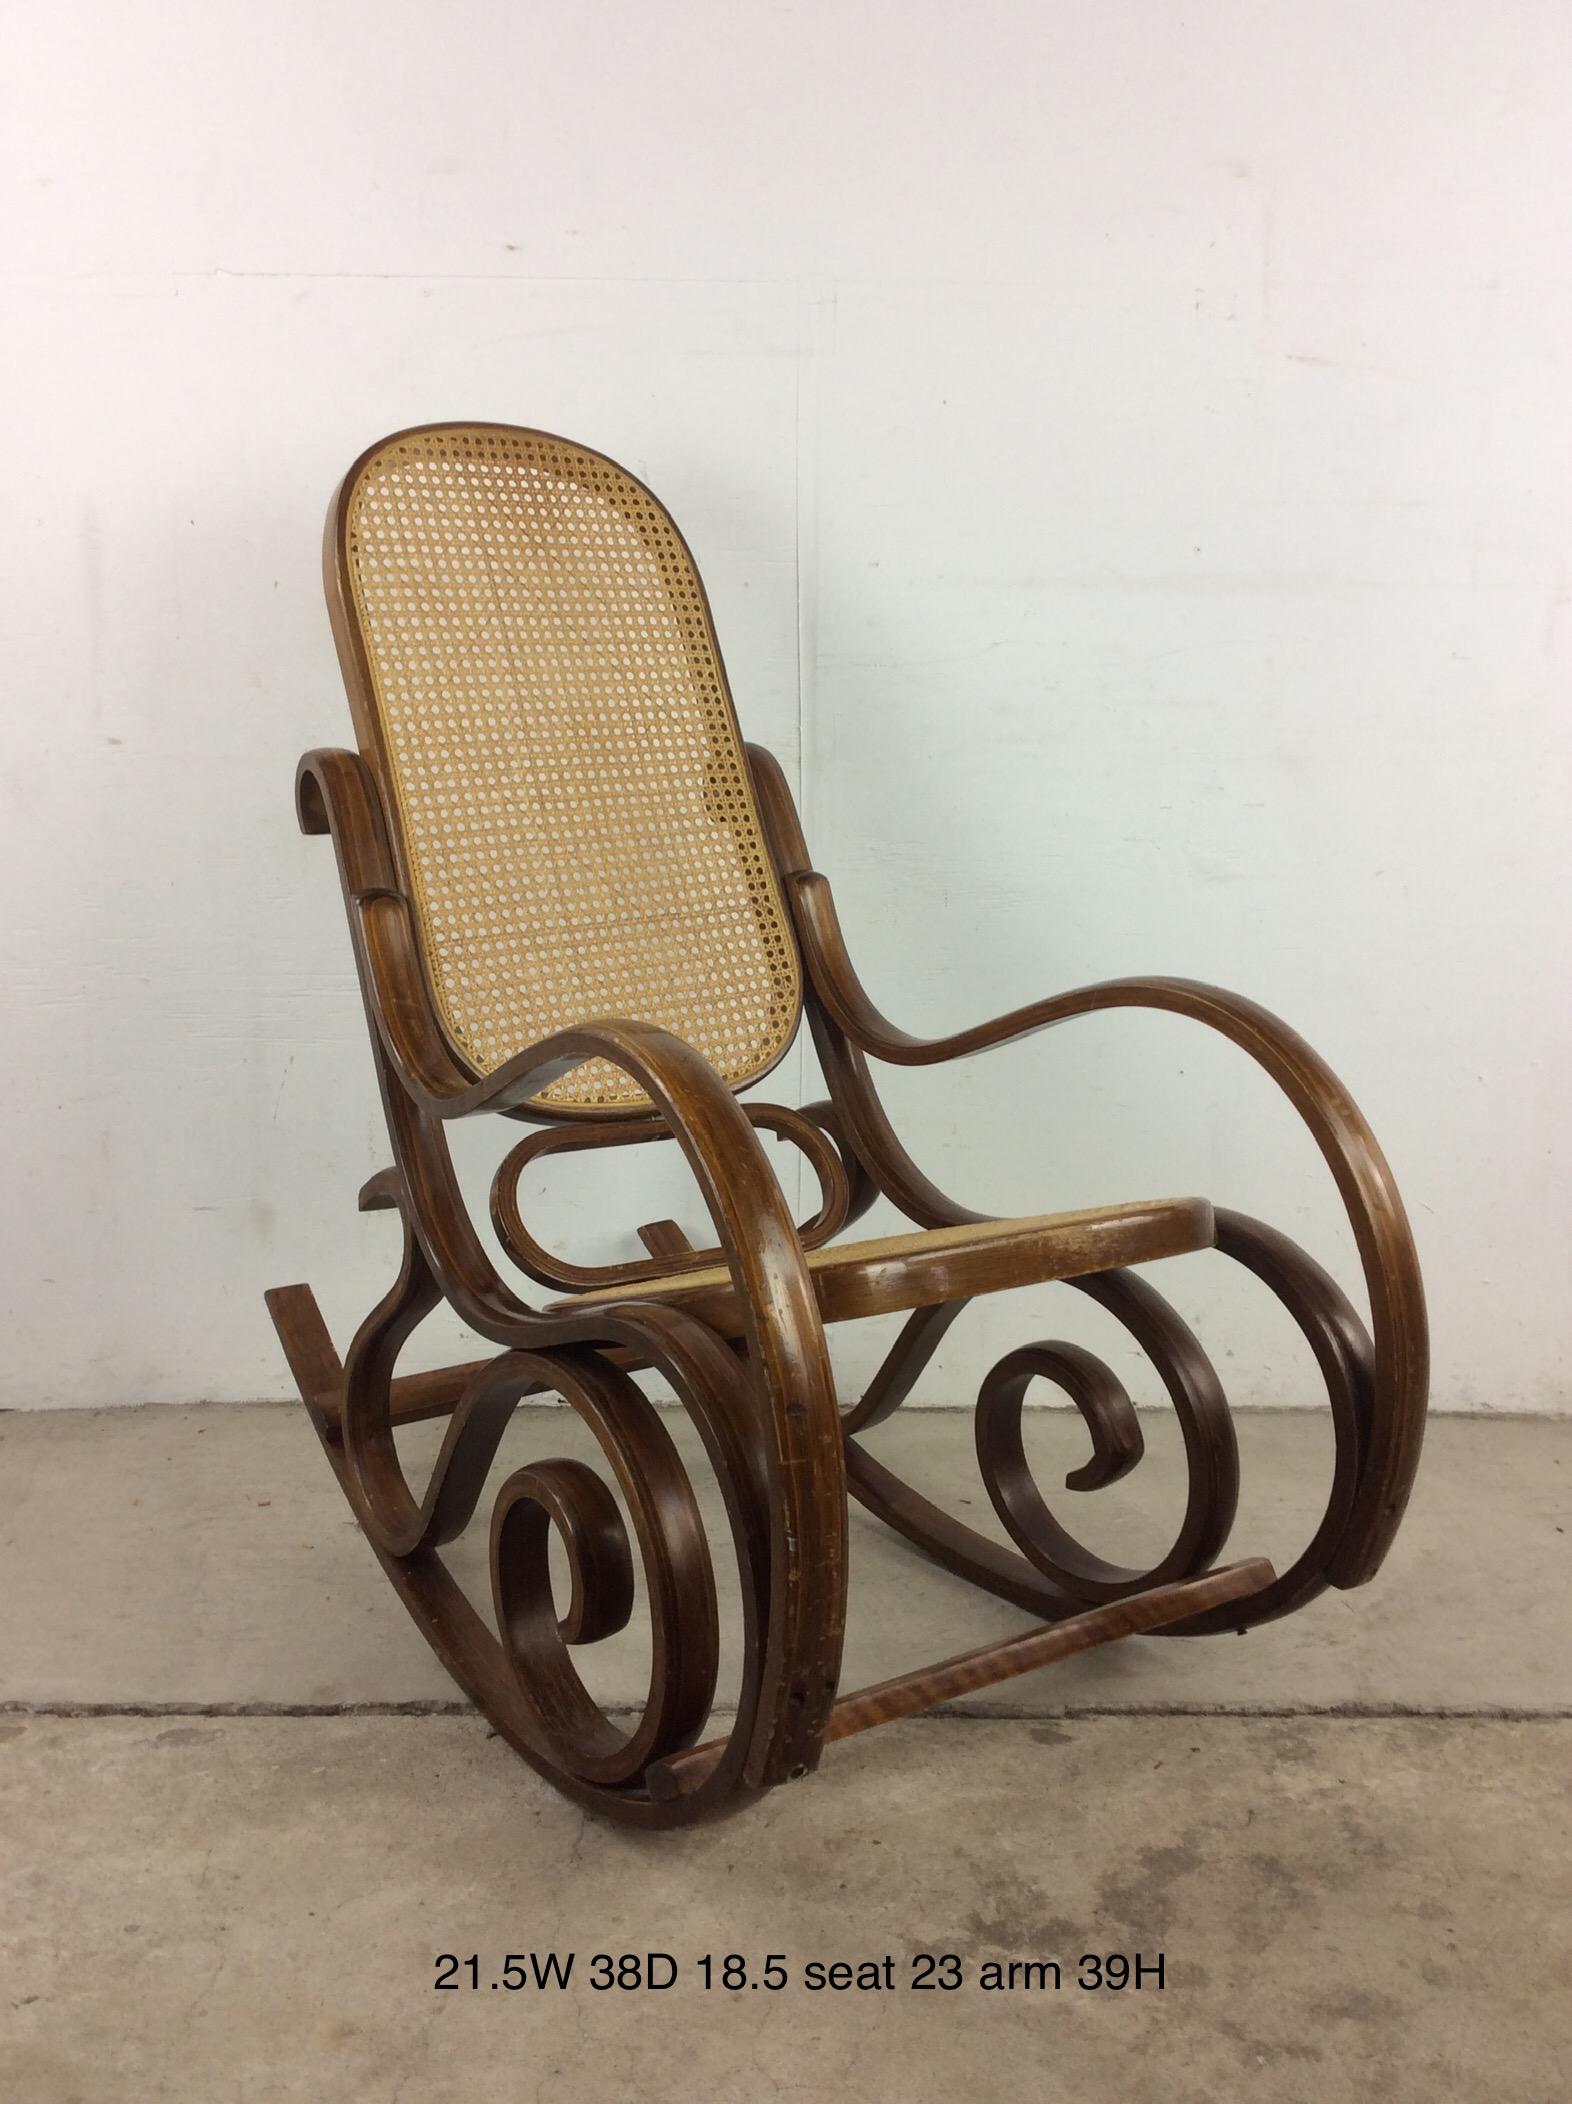 This vintage rocker in the style of Thonet features unique bentwood frame with caned seat and seat back.  Complimentary cafe chair & ottoman available separately.

Dimensions: 21.5w 38d 39h 23h 18.5sh

Condition: The finish is in good vintage